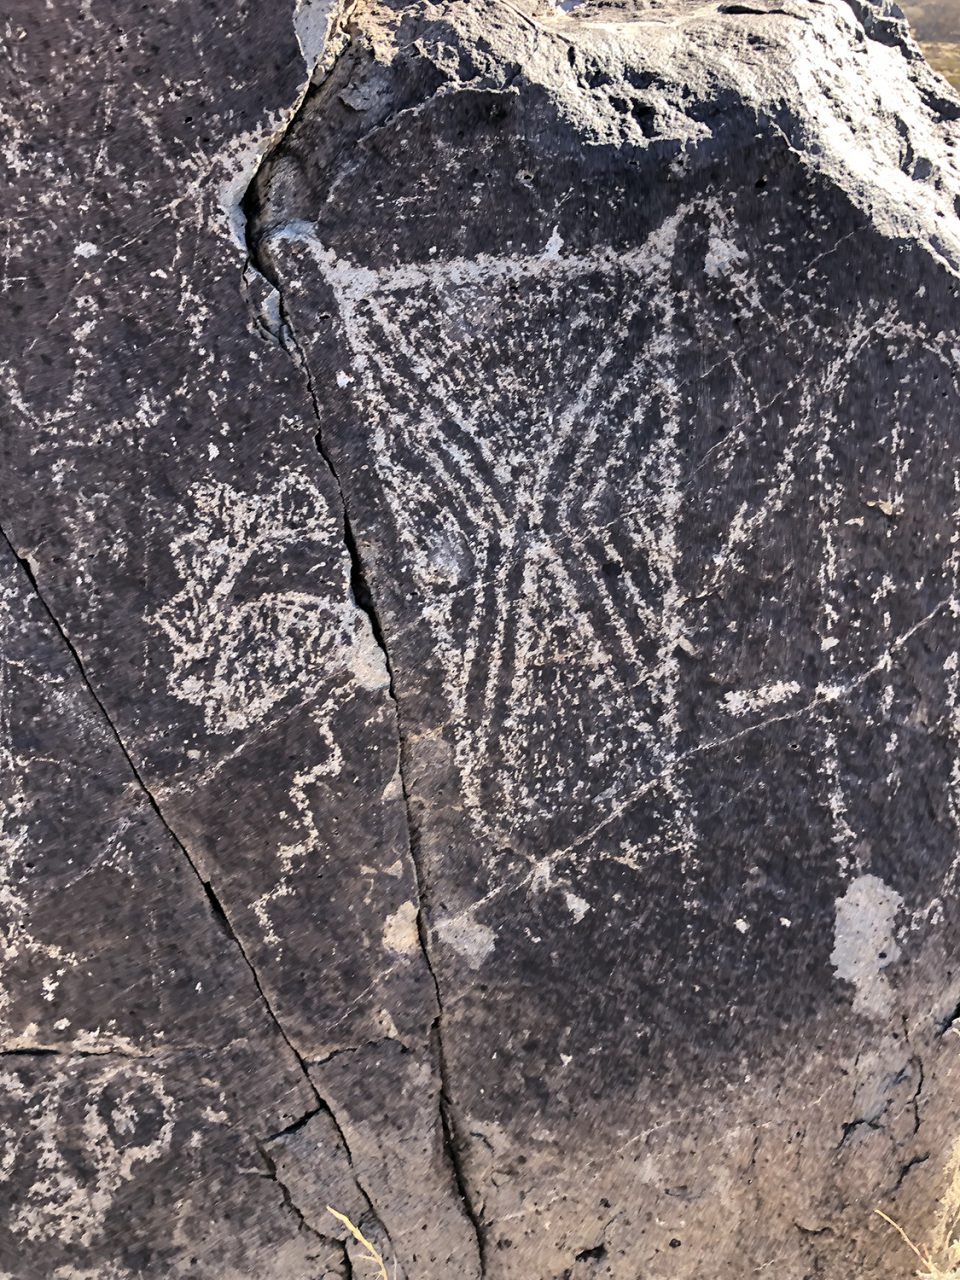 Three Rivers Petroglyph Site in New Mexico. Photograph by Keith Dotson. Copyright 2022.